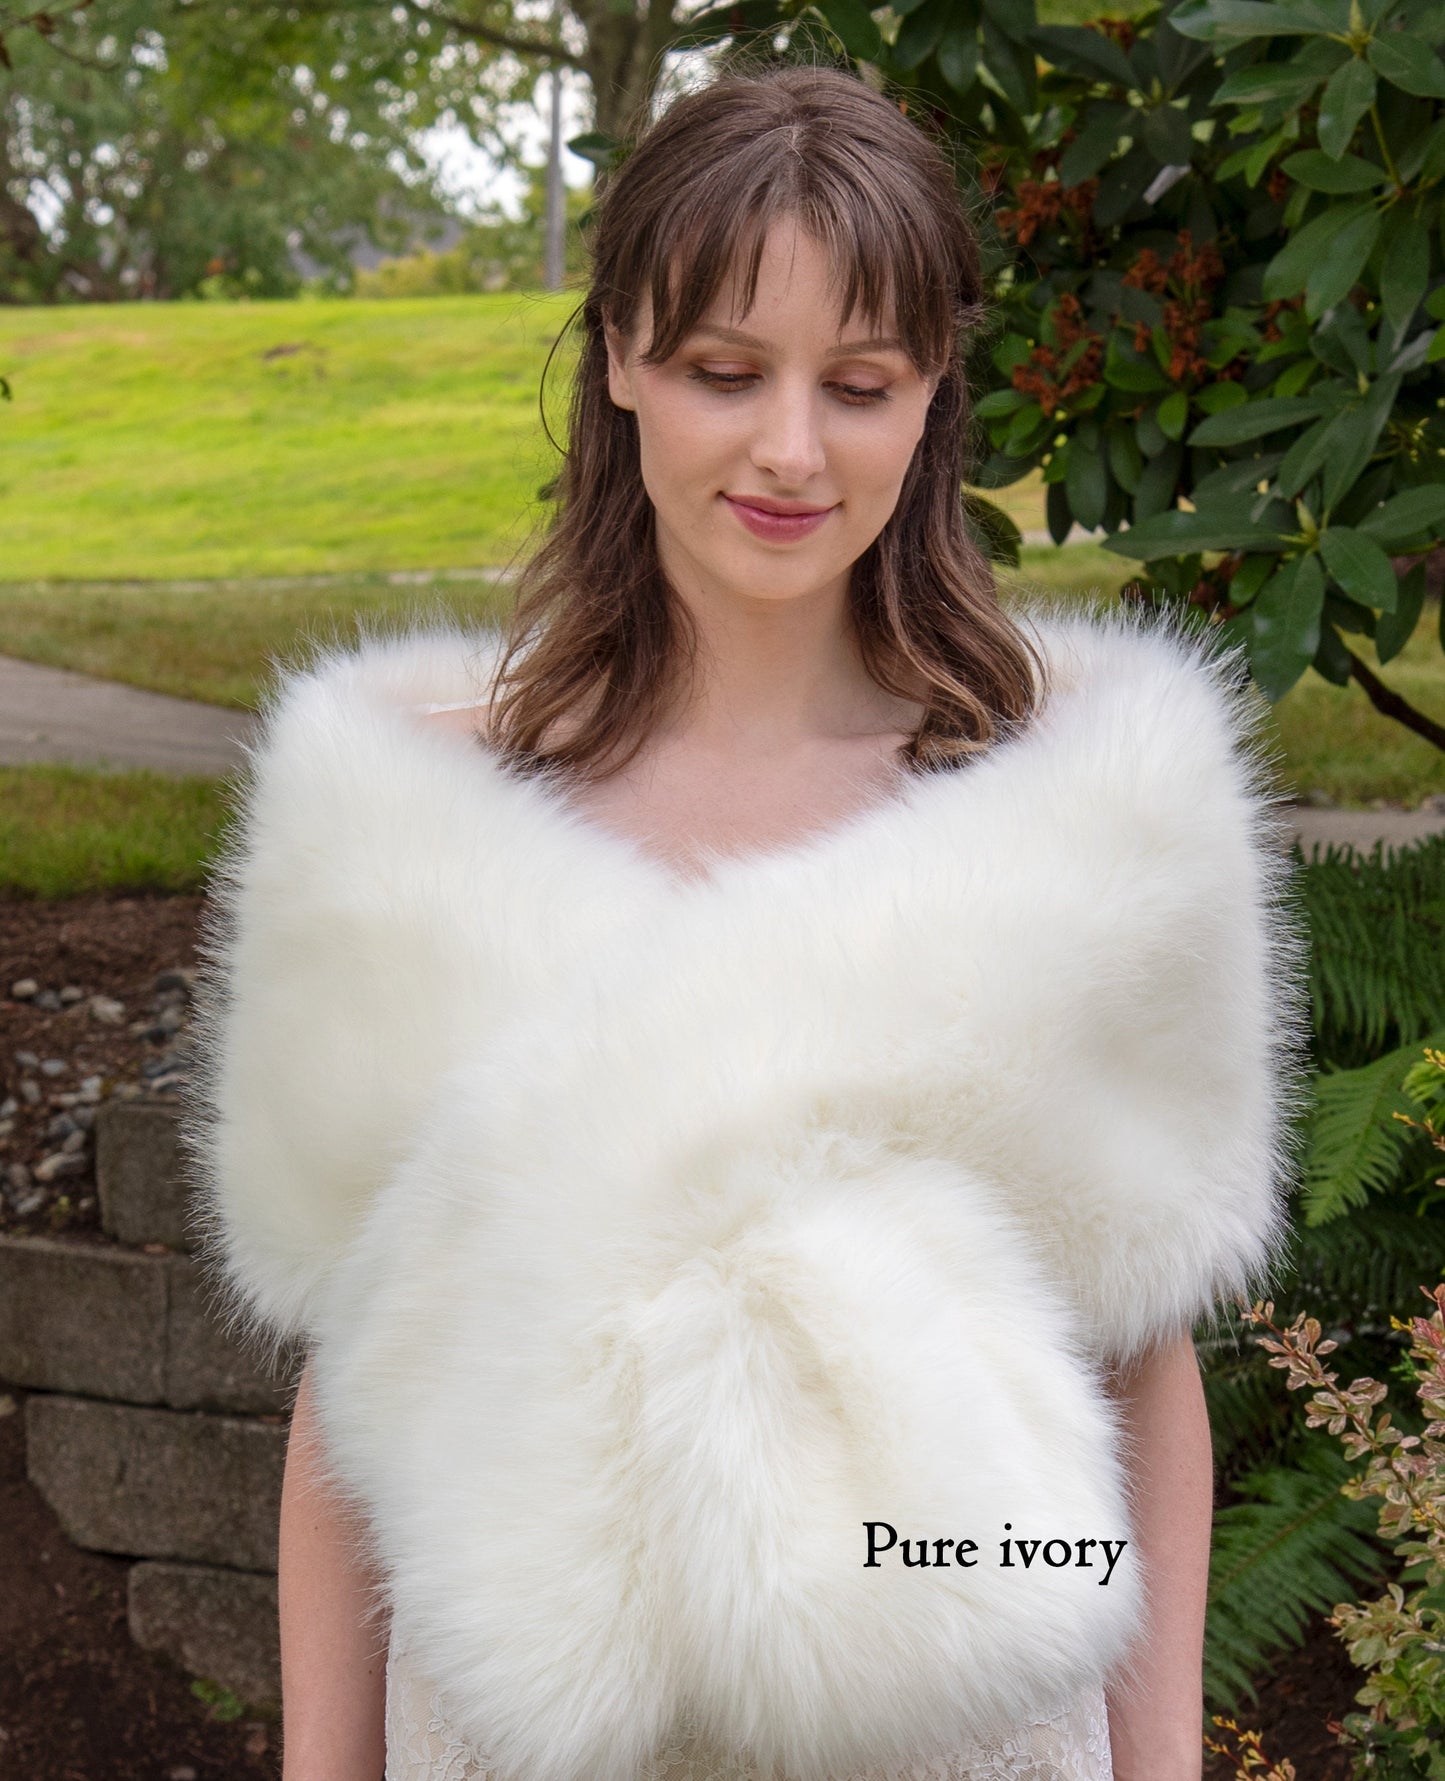 Ivory Faux Fur Bridal Wrap with brown tips, Wedding Fur Shawl, Ivory Fur Wrap, Bridal Faux Fur Stole, Wedding Cape B005-Ivory-brown-tips